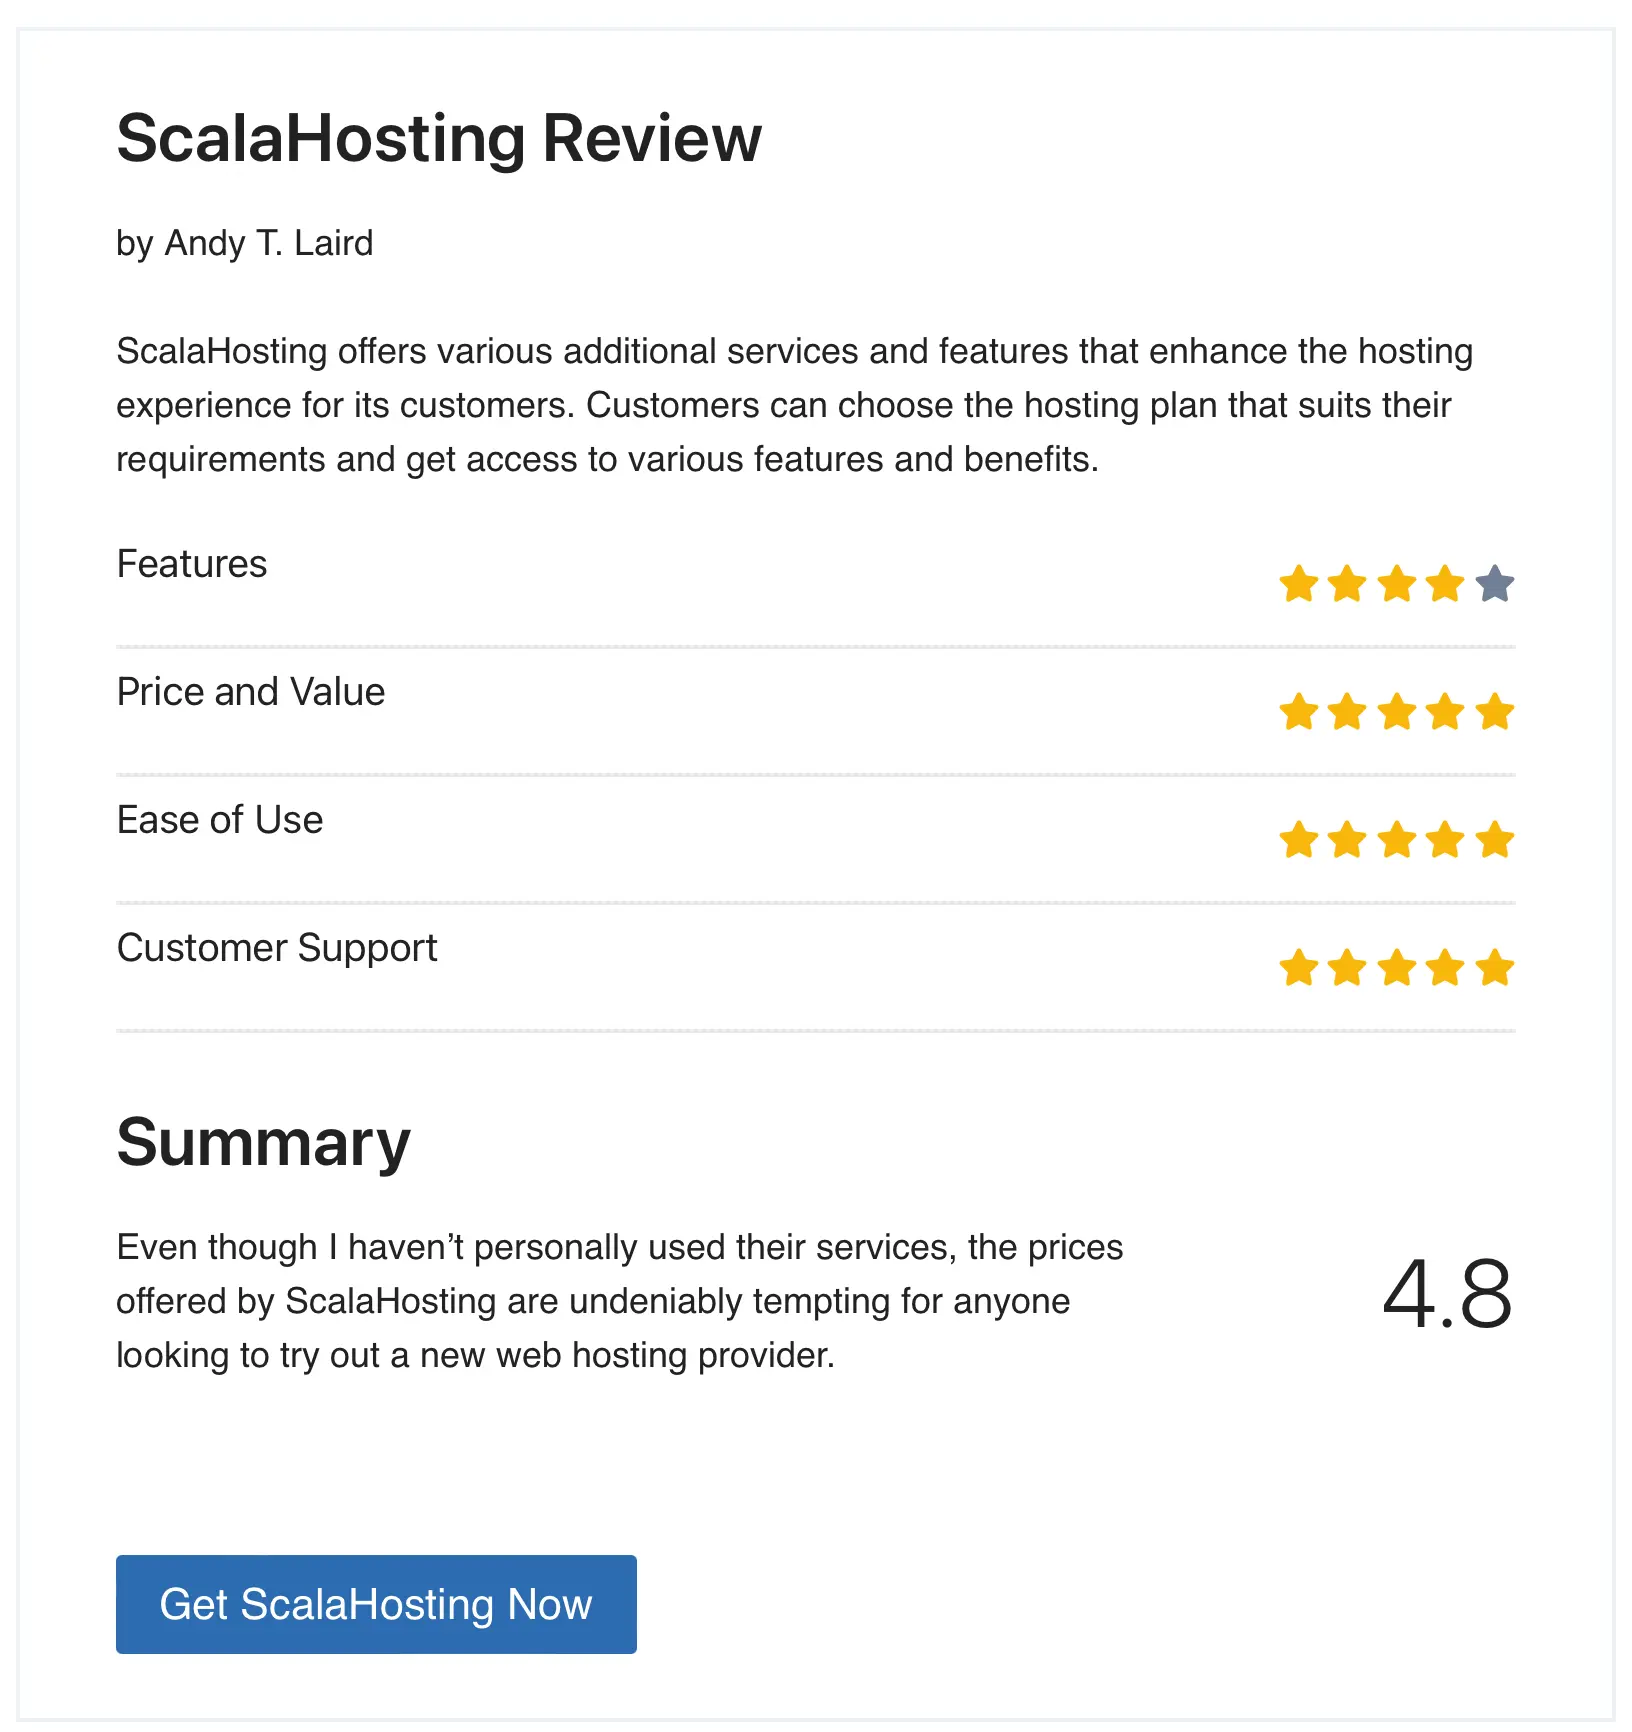 ScalaHosting Review Rating